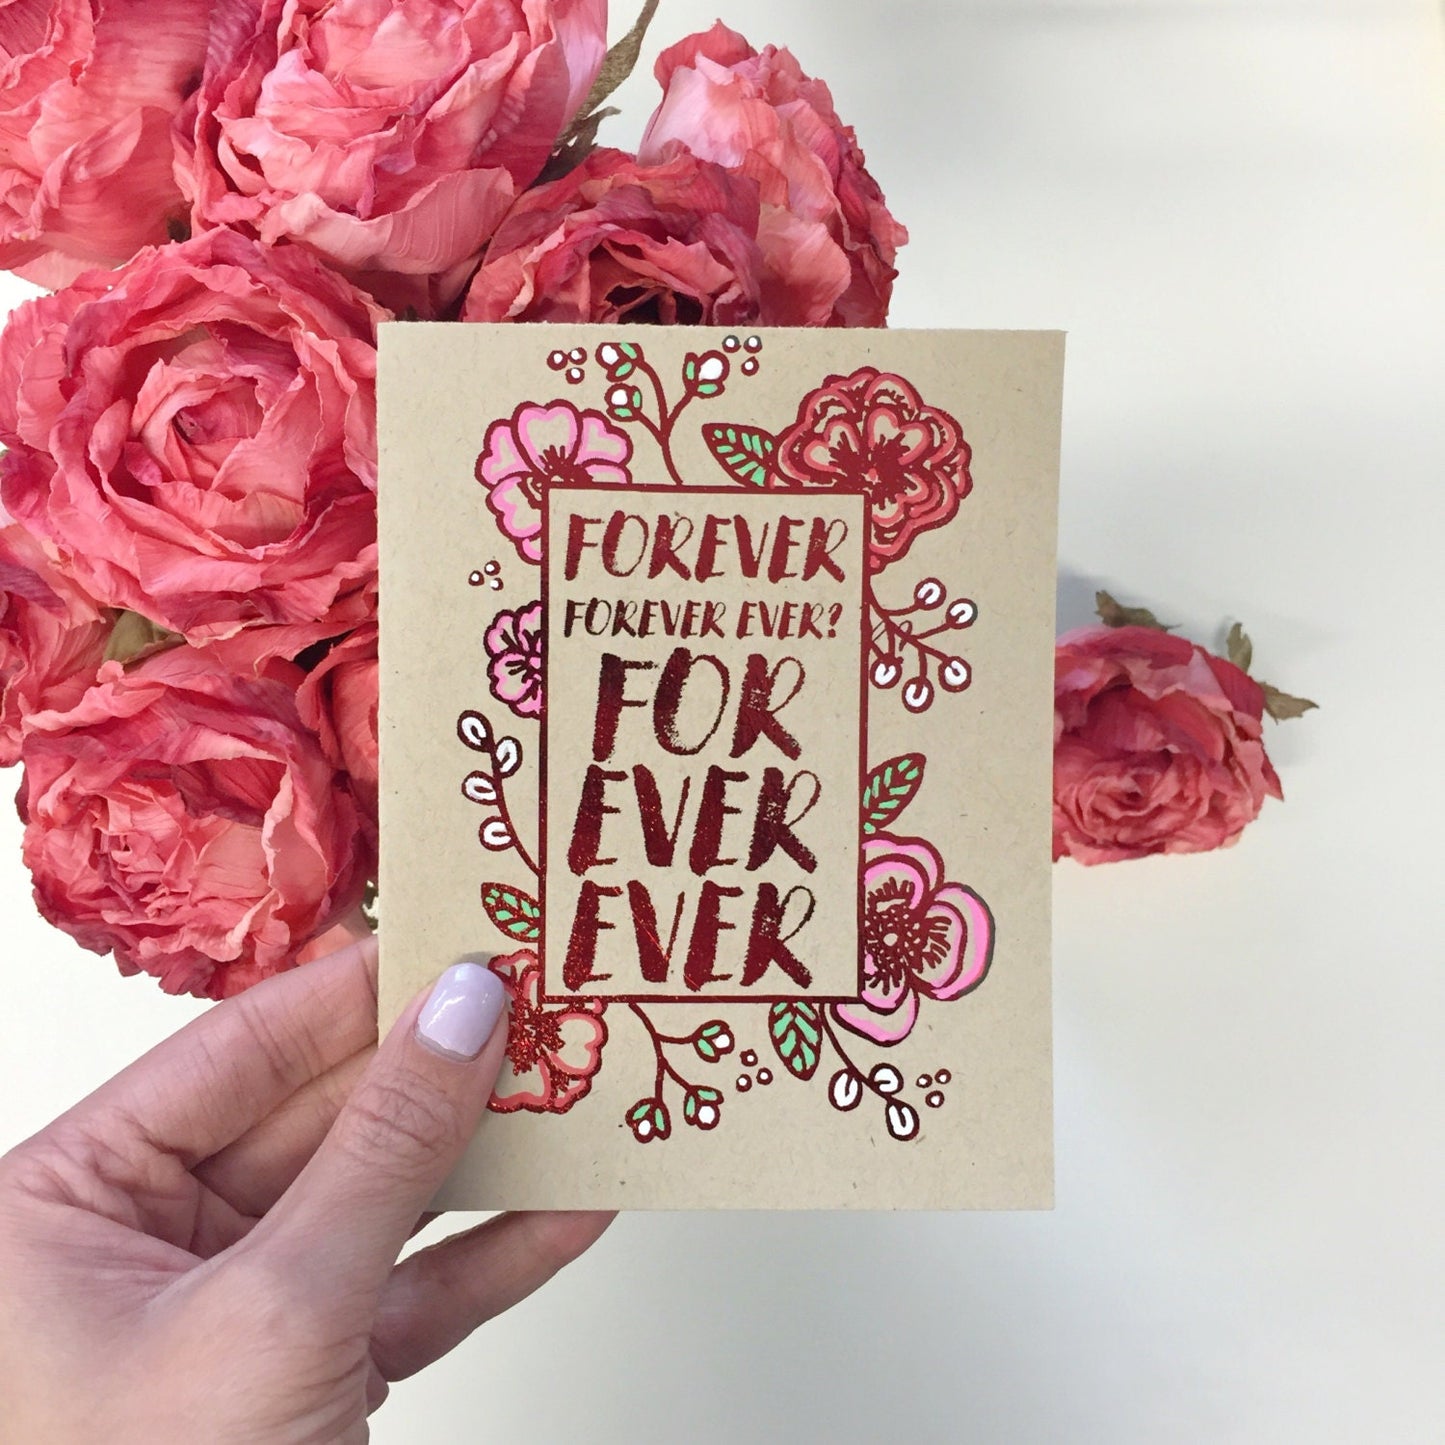 Forever Ever - Handmade A2 Wedding Engagement Anniversary Congratulations Love Hip Hop Outkast Ms Jackson Card with Foiled Lettering